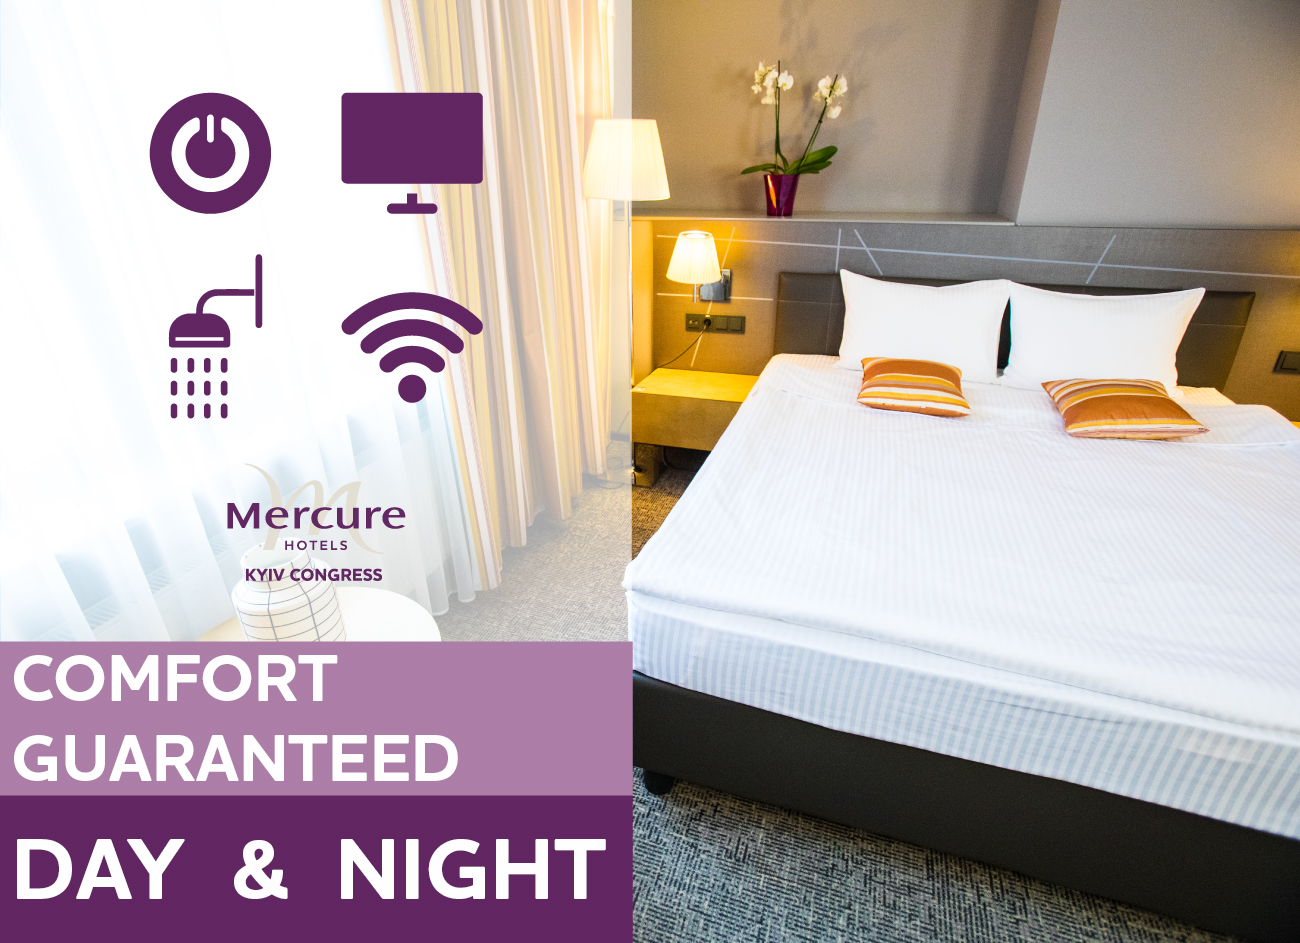 Comfort and safety at Mercure Kyiv Congress hotel - be our guest!